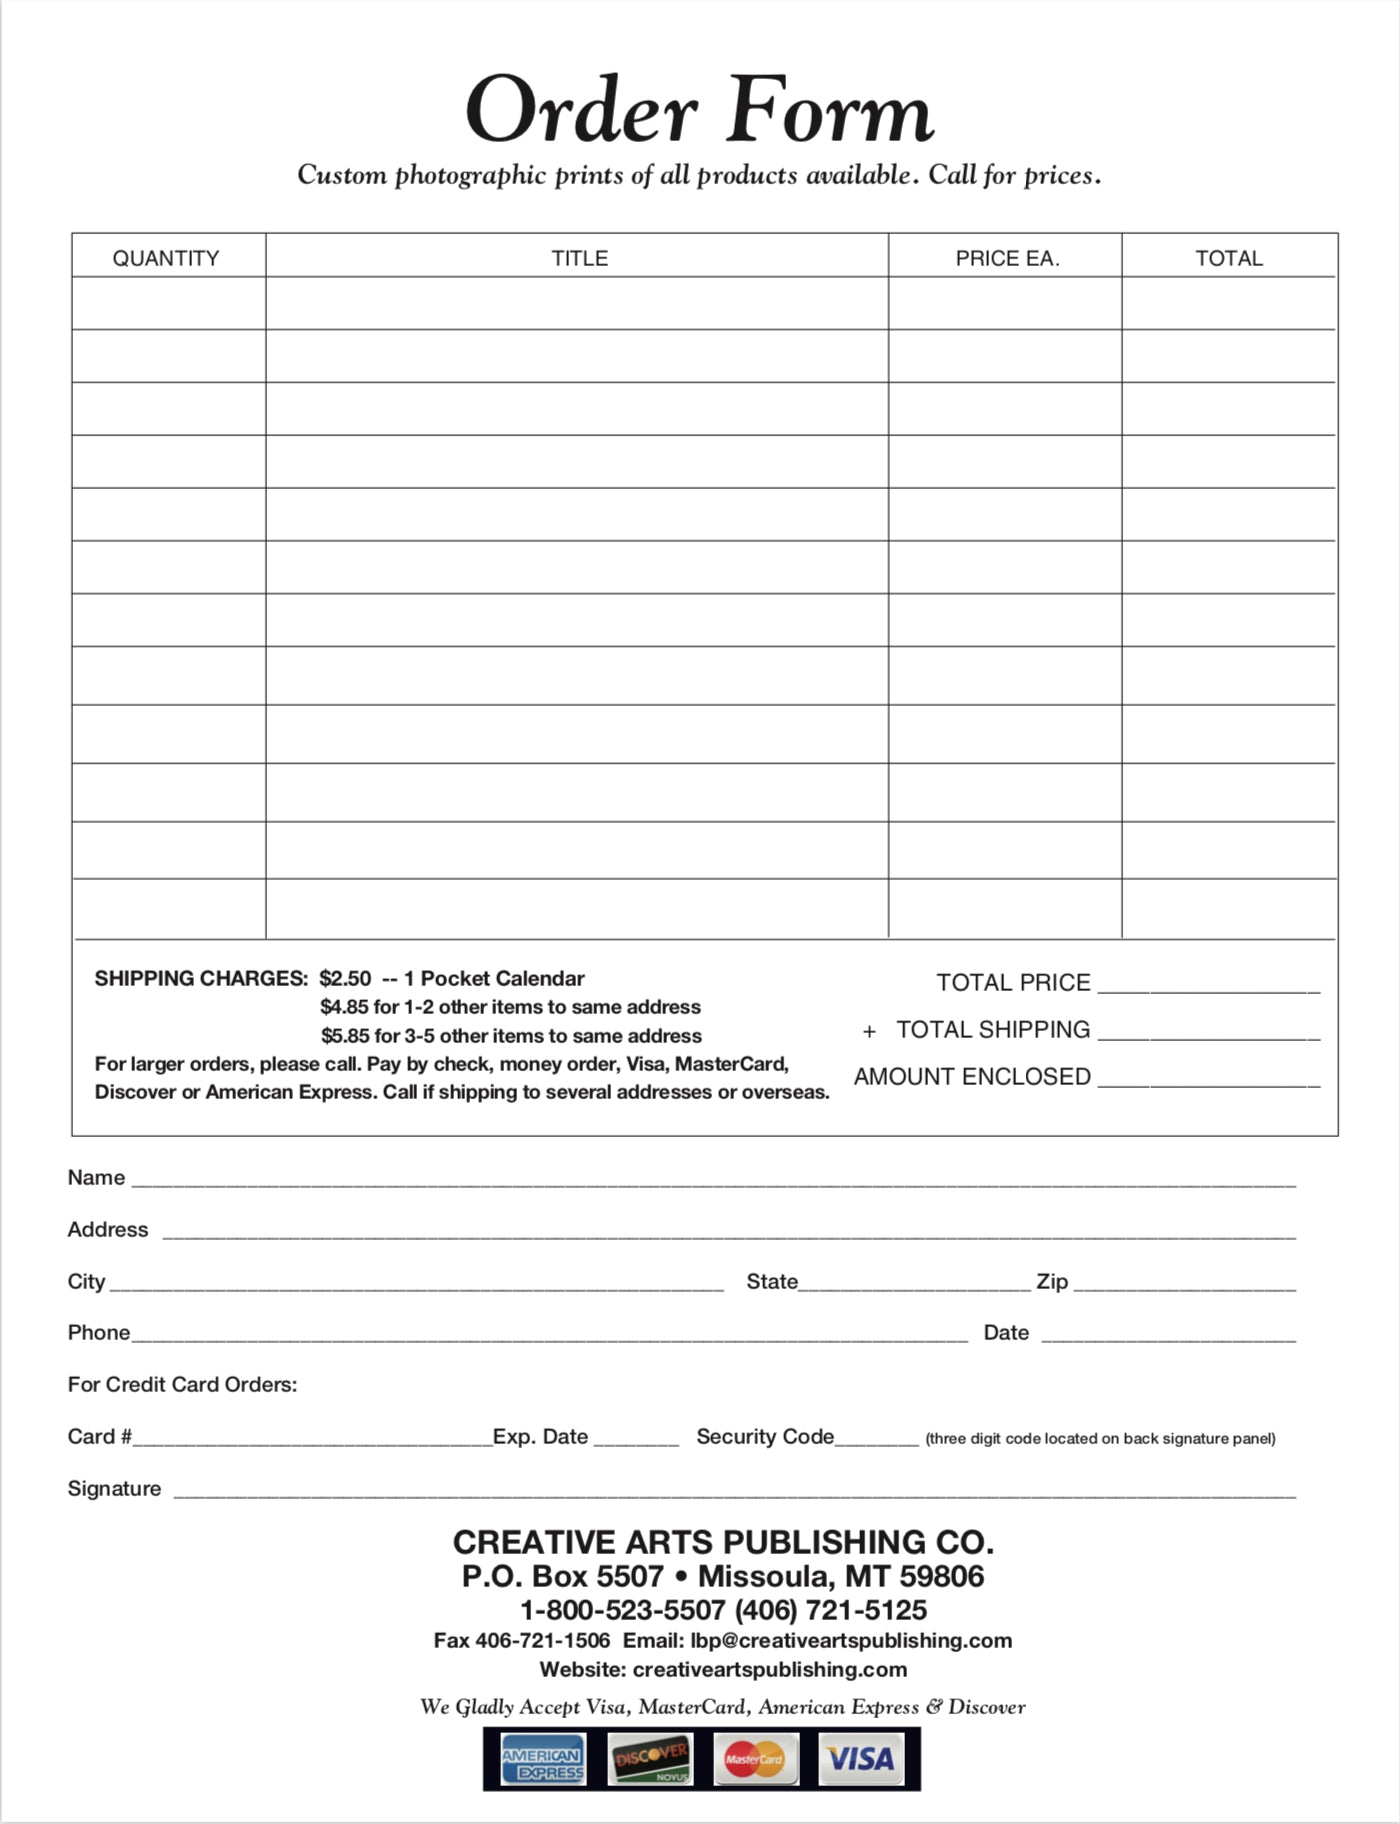 Order Form Template Printable Free